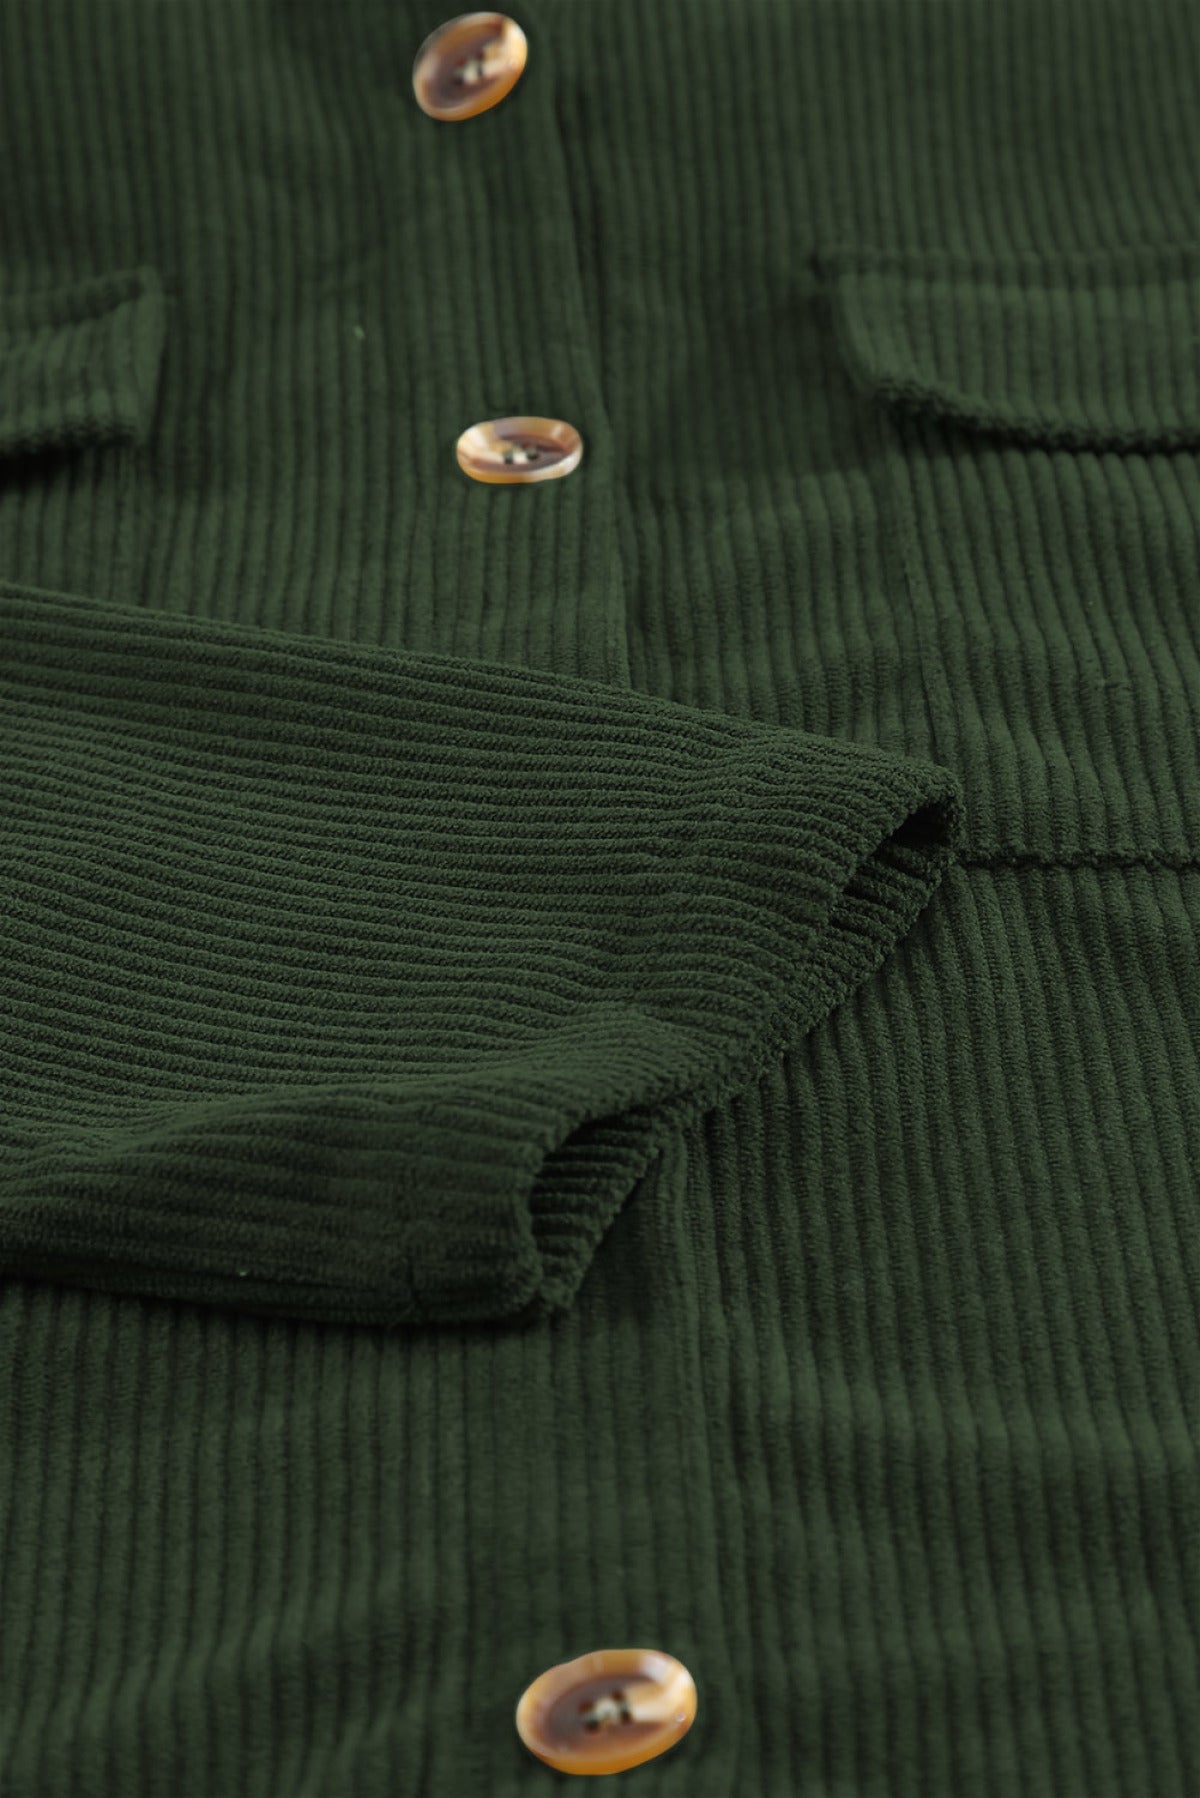 Pocketed Button Ribbed Textured Shacket